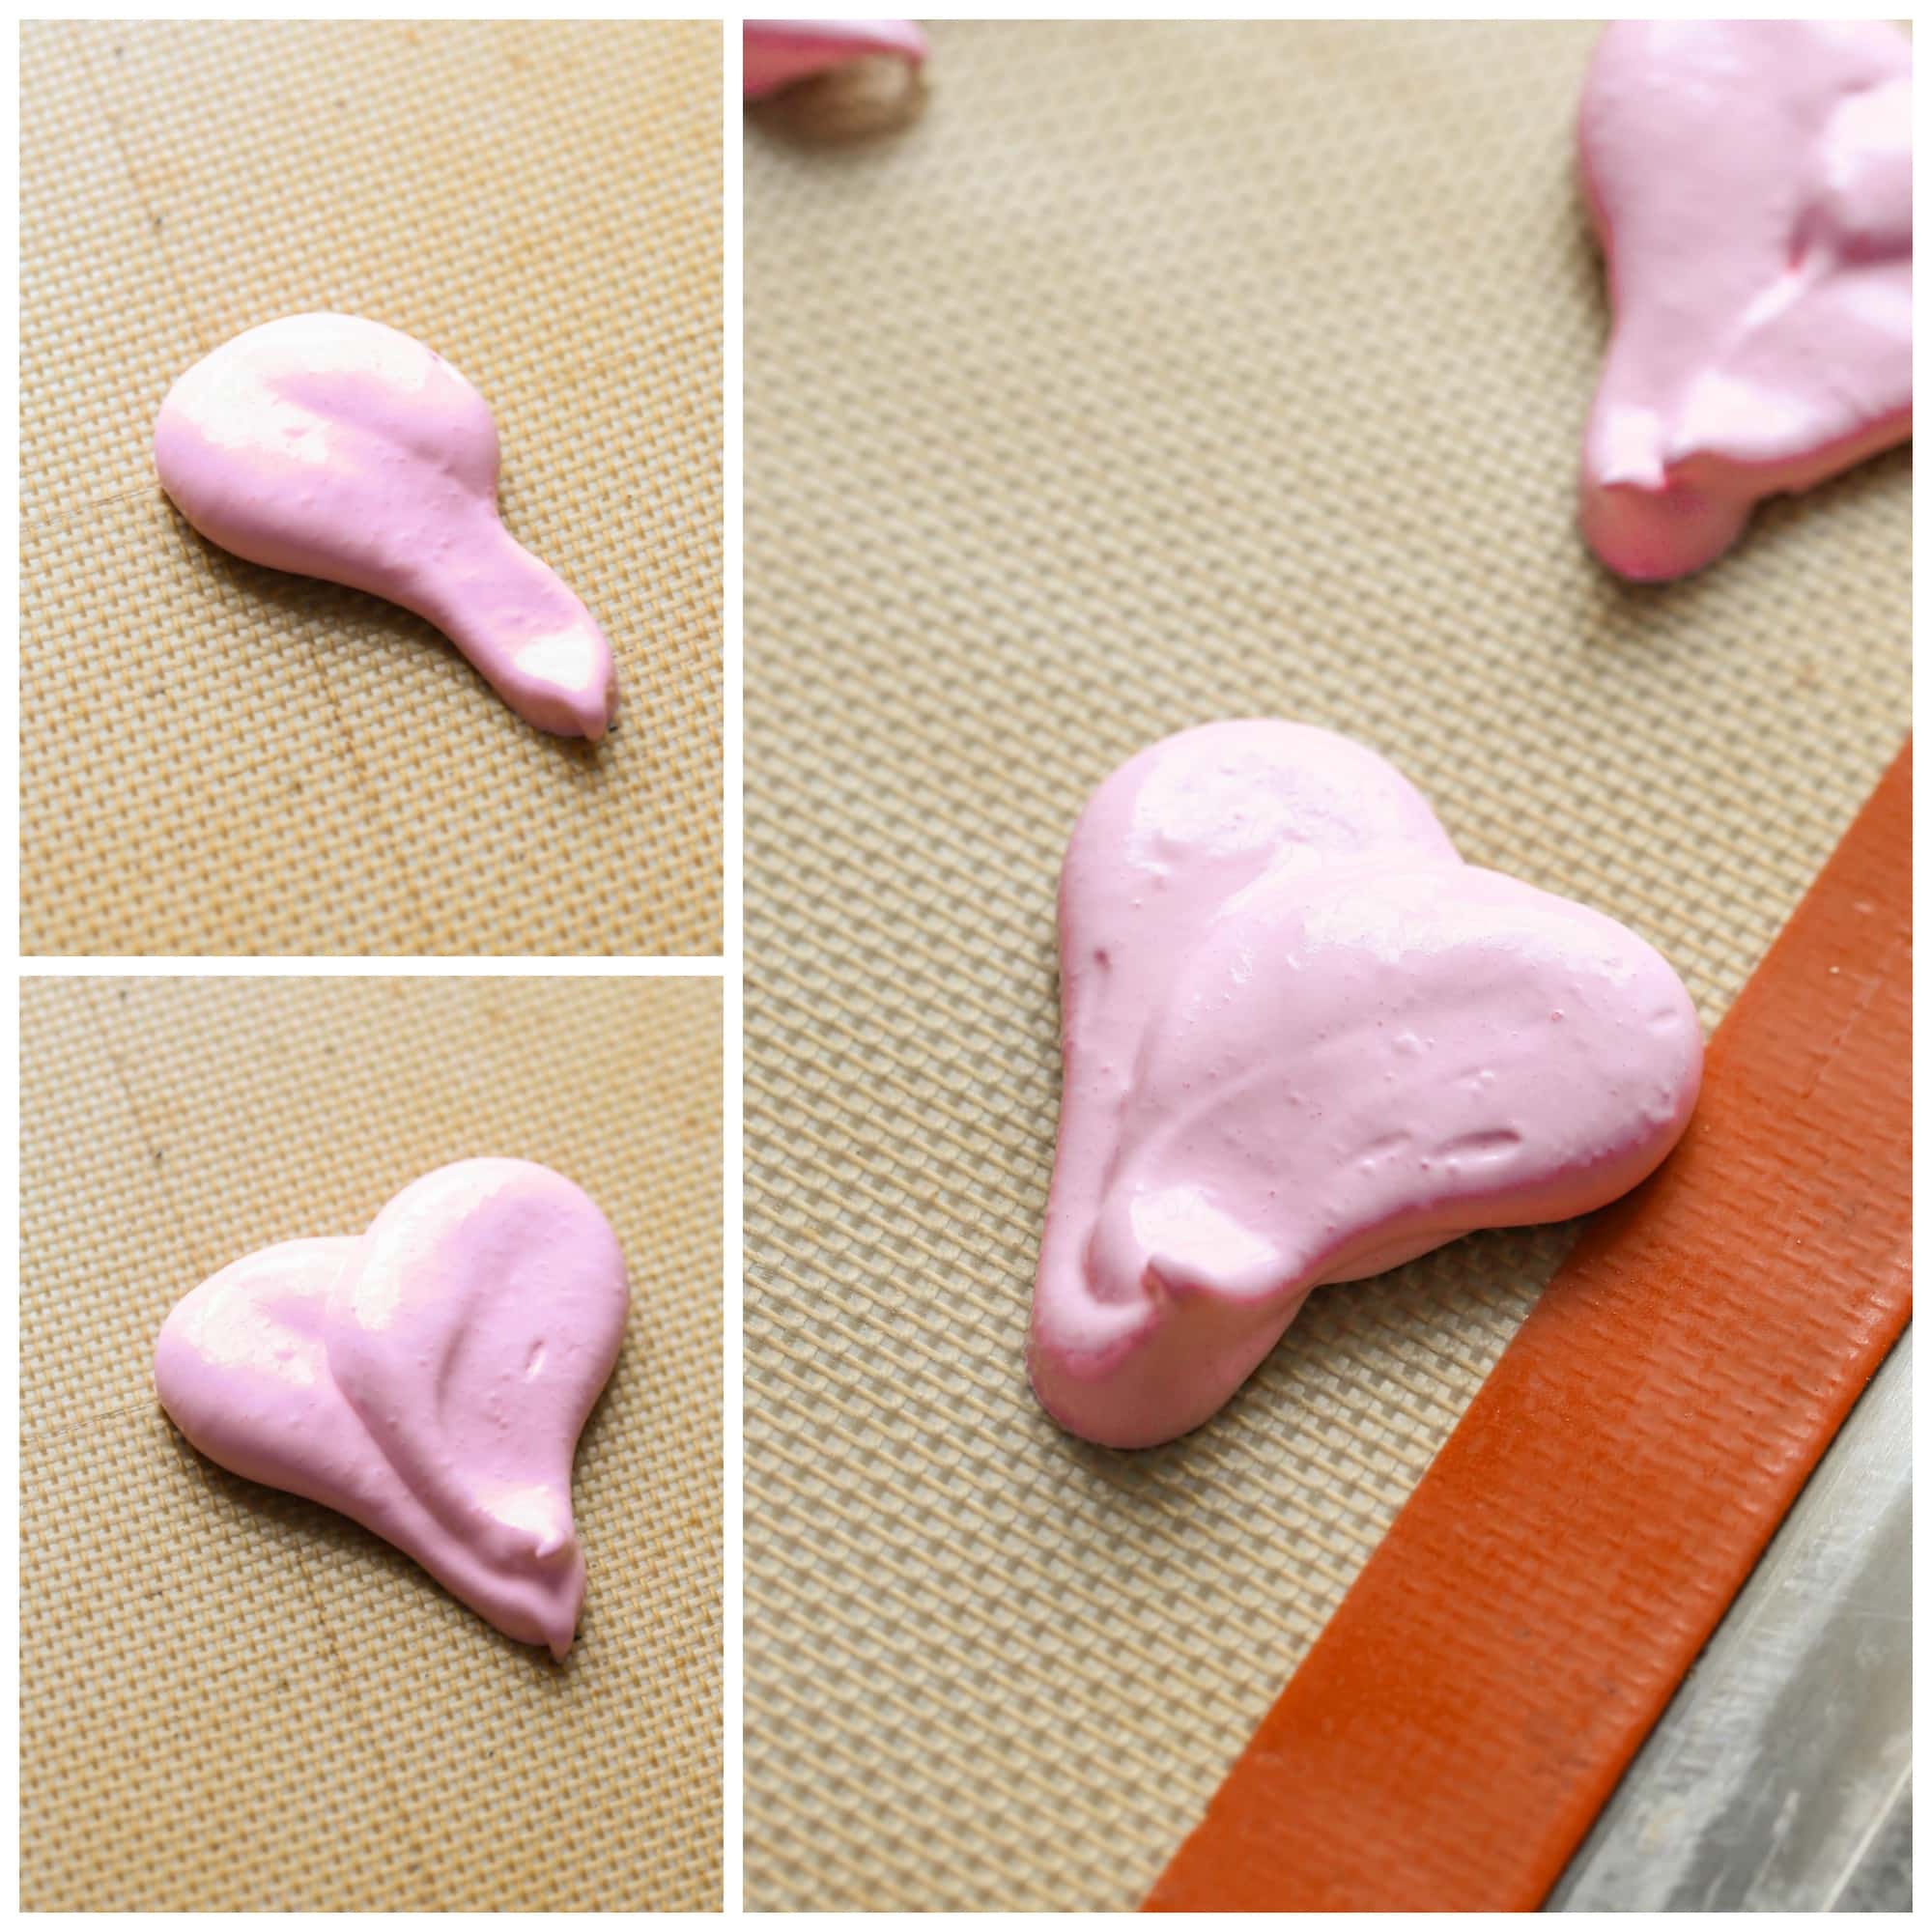 Photo collage showing how to pipe out pink meringue into a heart shape.